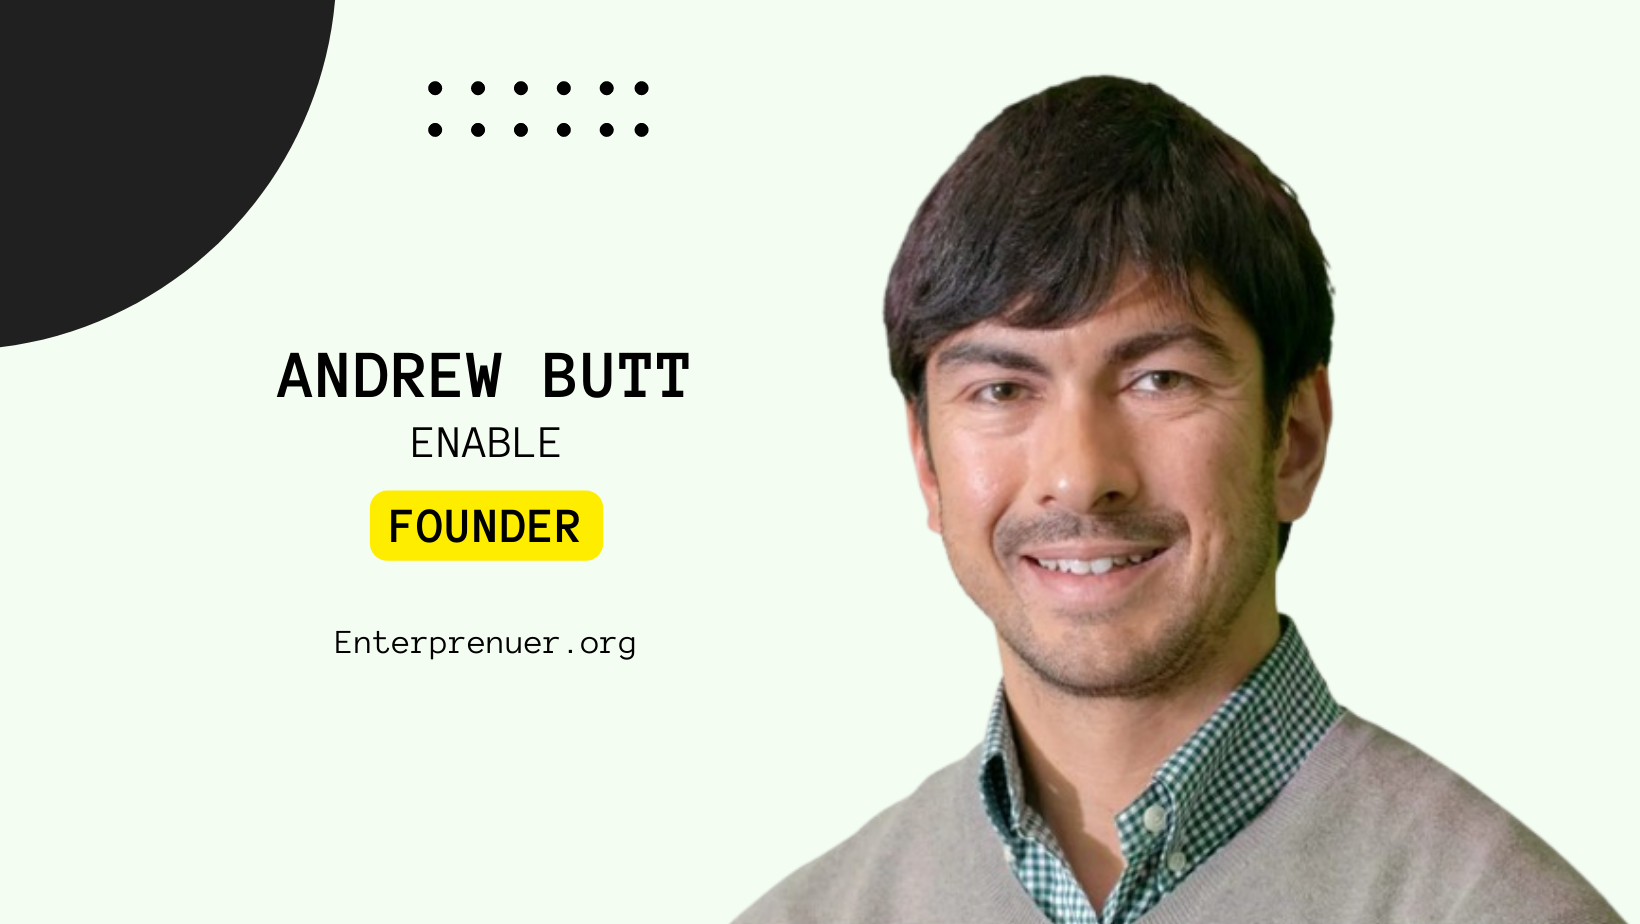 Andrew Butt Co-Founder of Enable